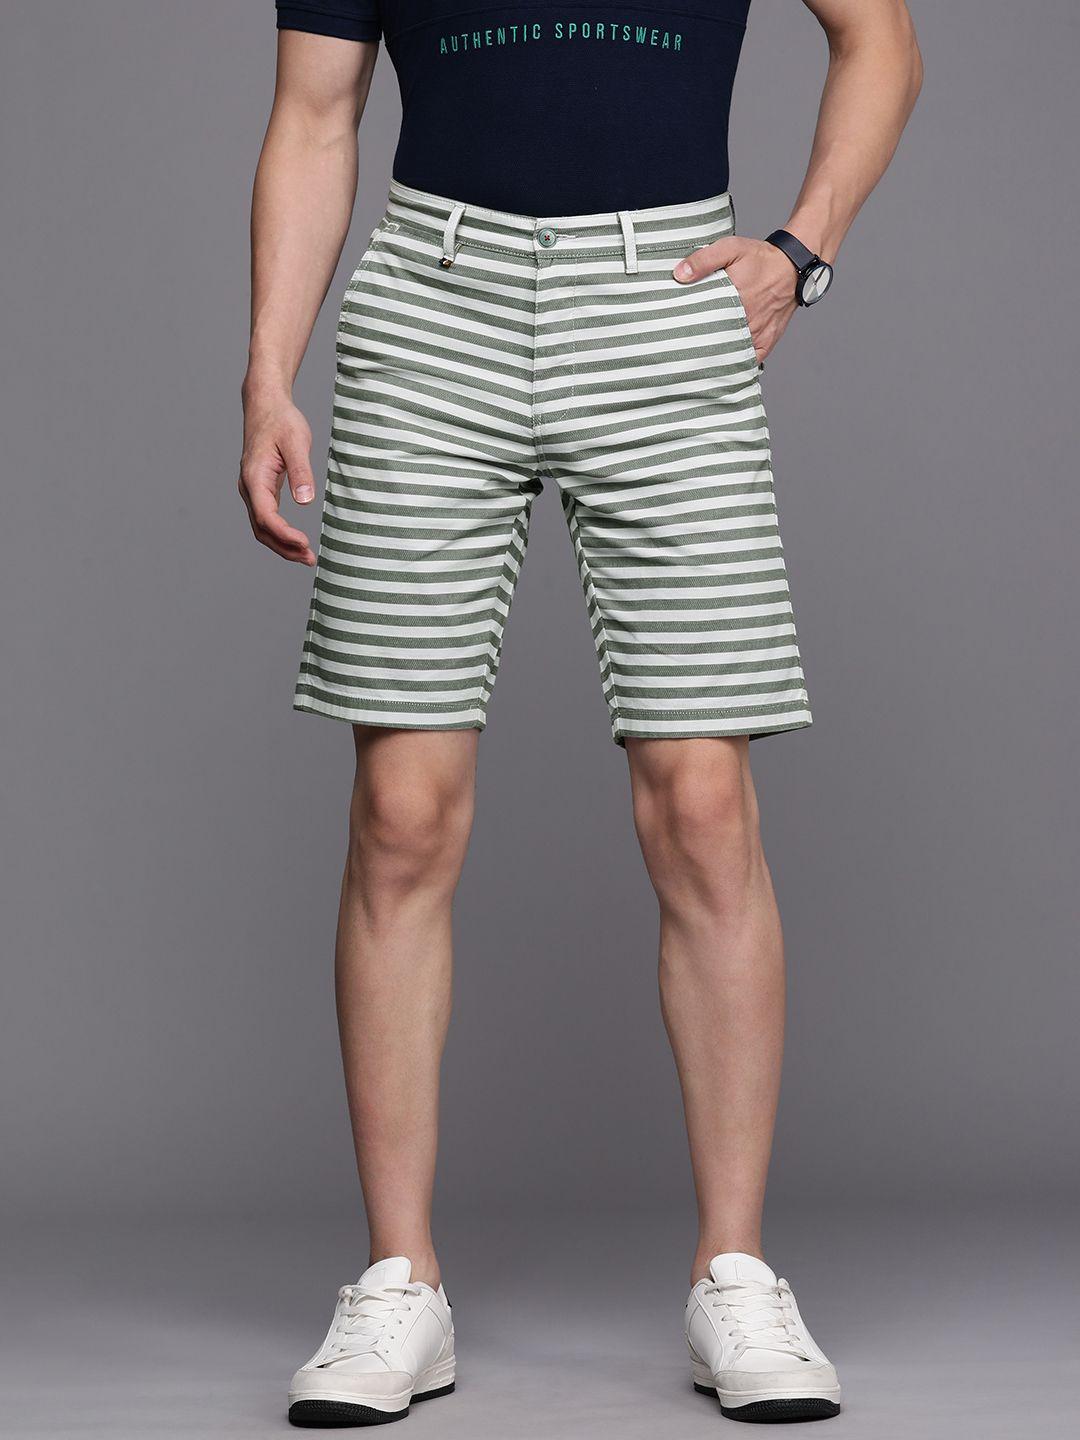 louis philippe sport men white & olive green striped slim fit shorts